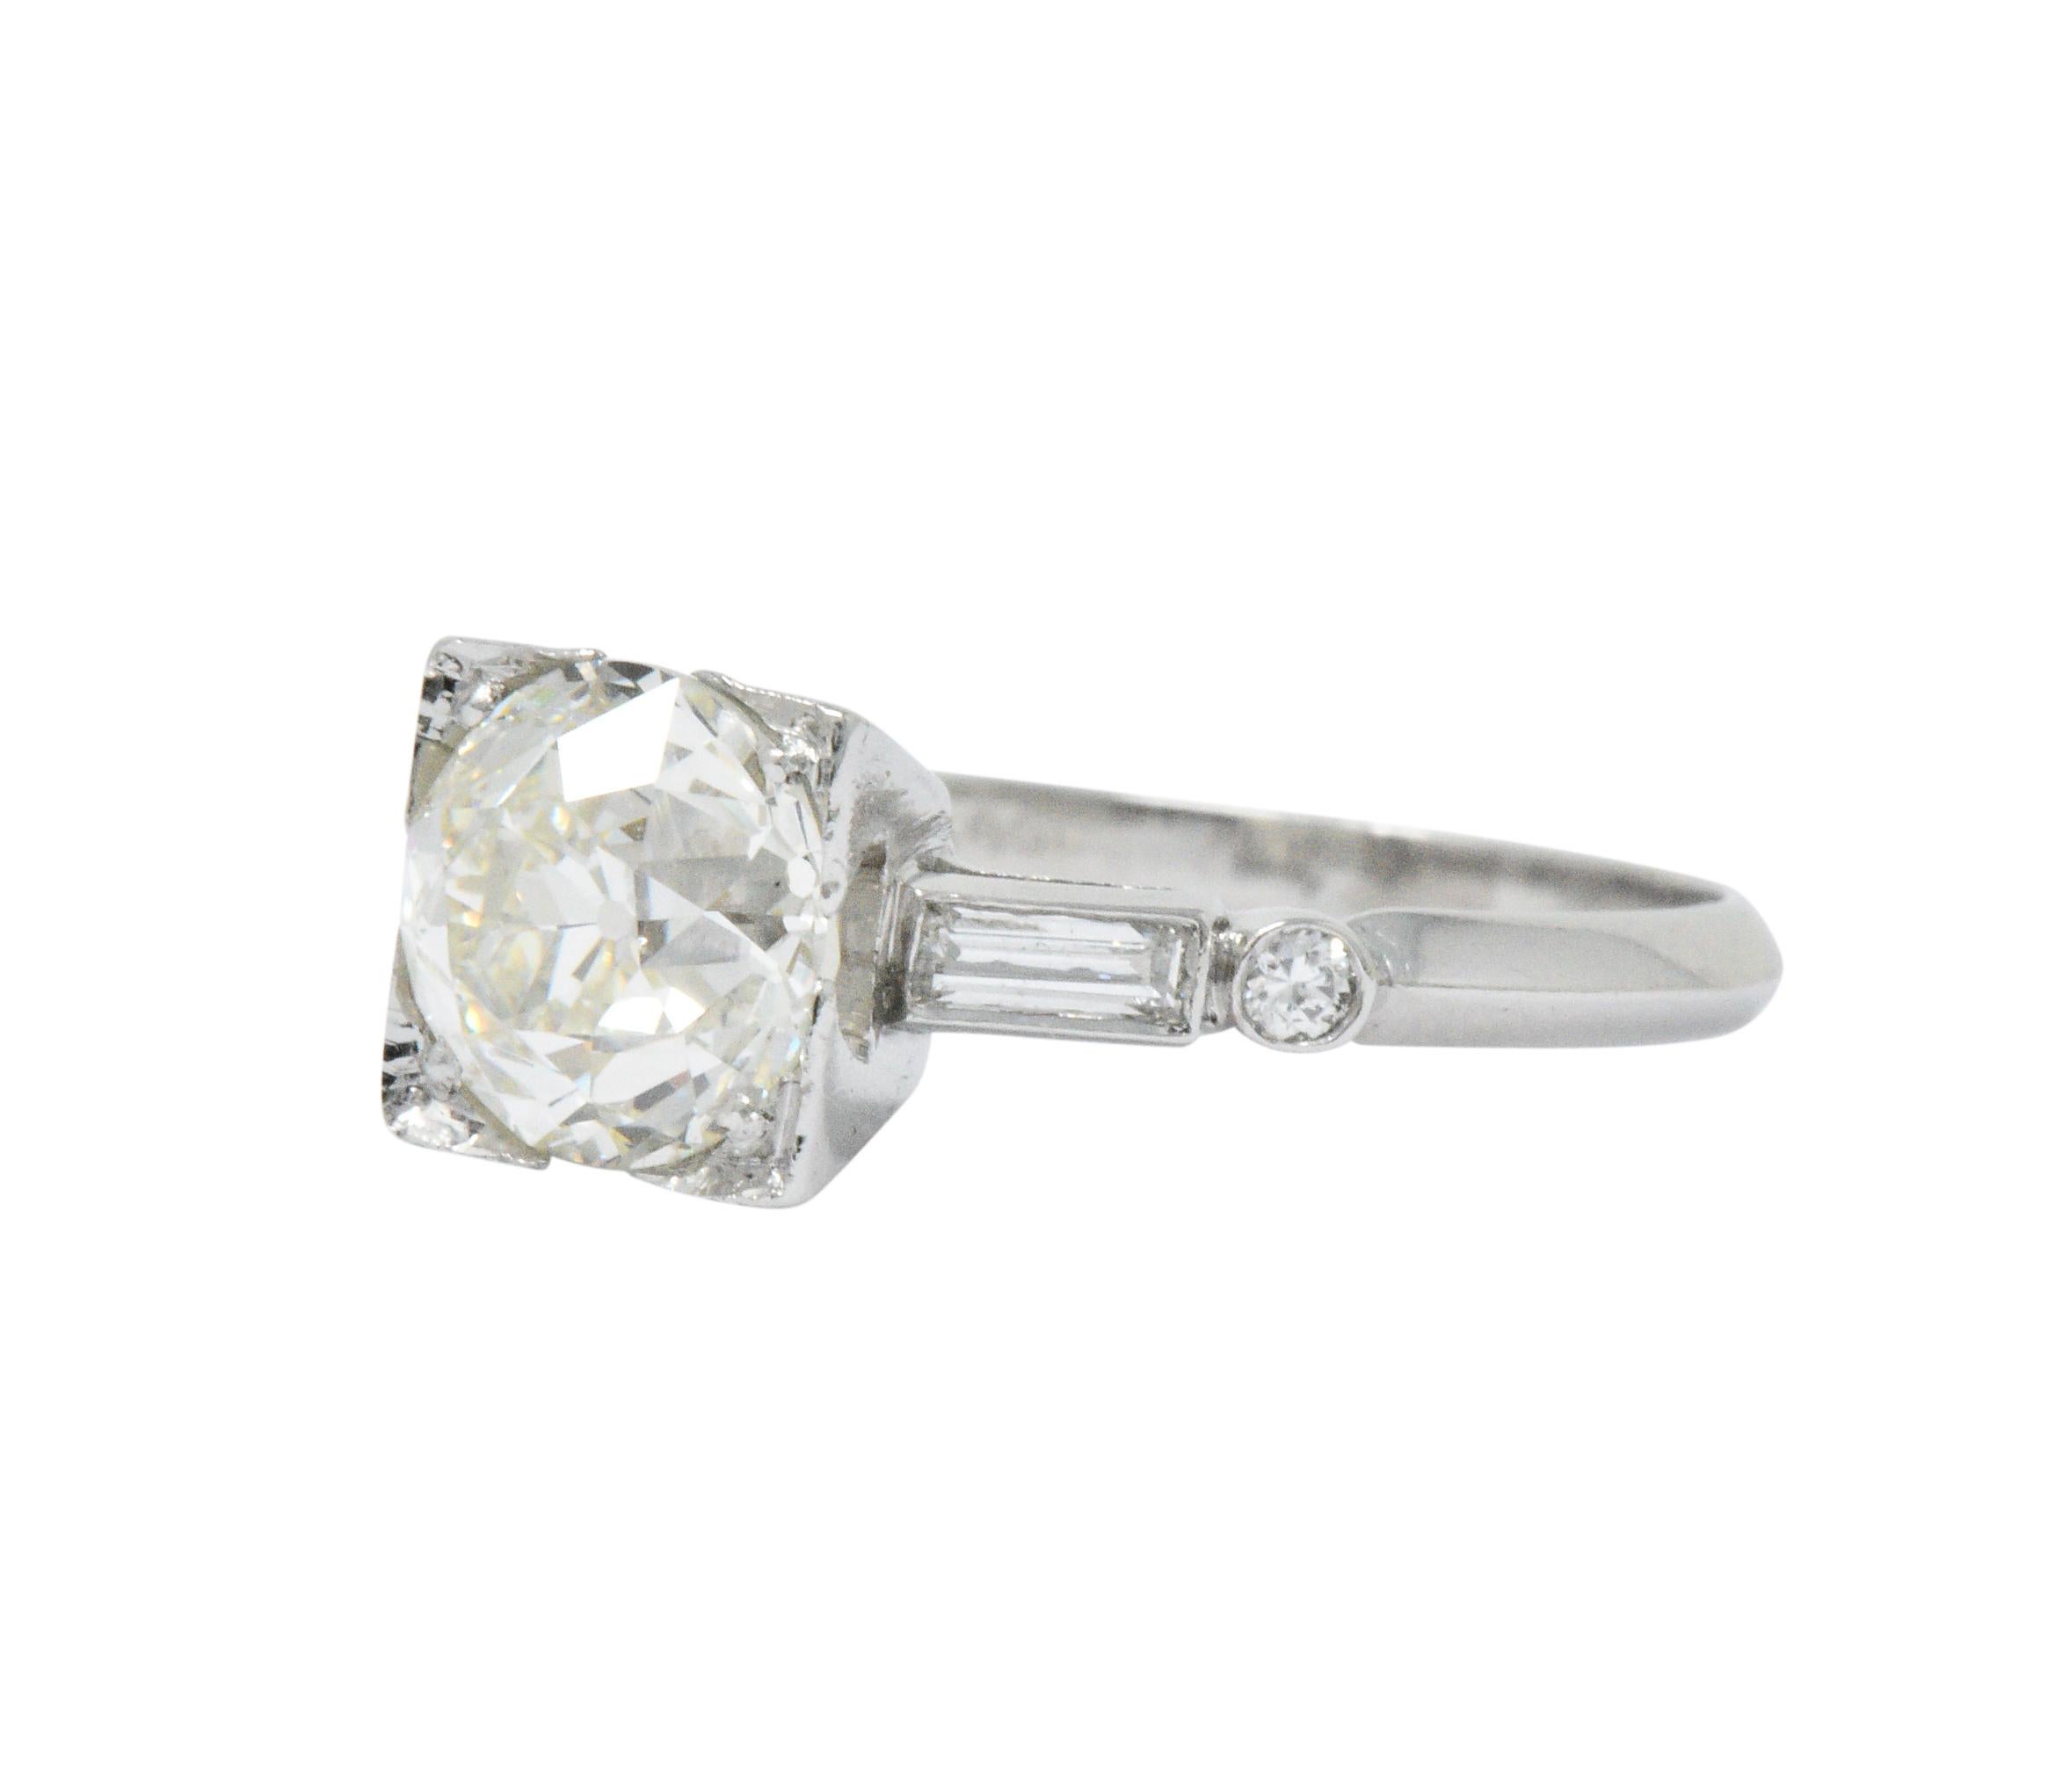 Centering an old European cut diamond weighing 1.94 carats, L color with VS1 clarity

Set in a decoratively pierced square form head then flanked by straight baguette cut diamonds and single cut diamonds; flush set in cathedral style